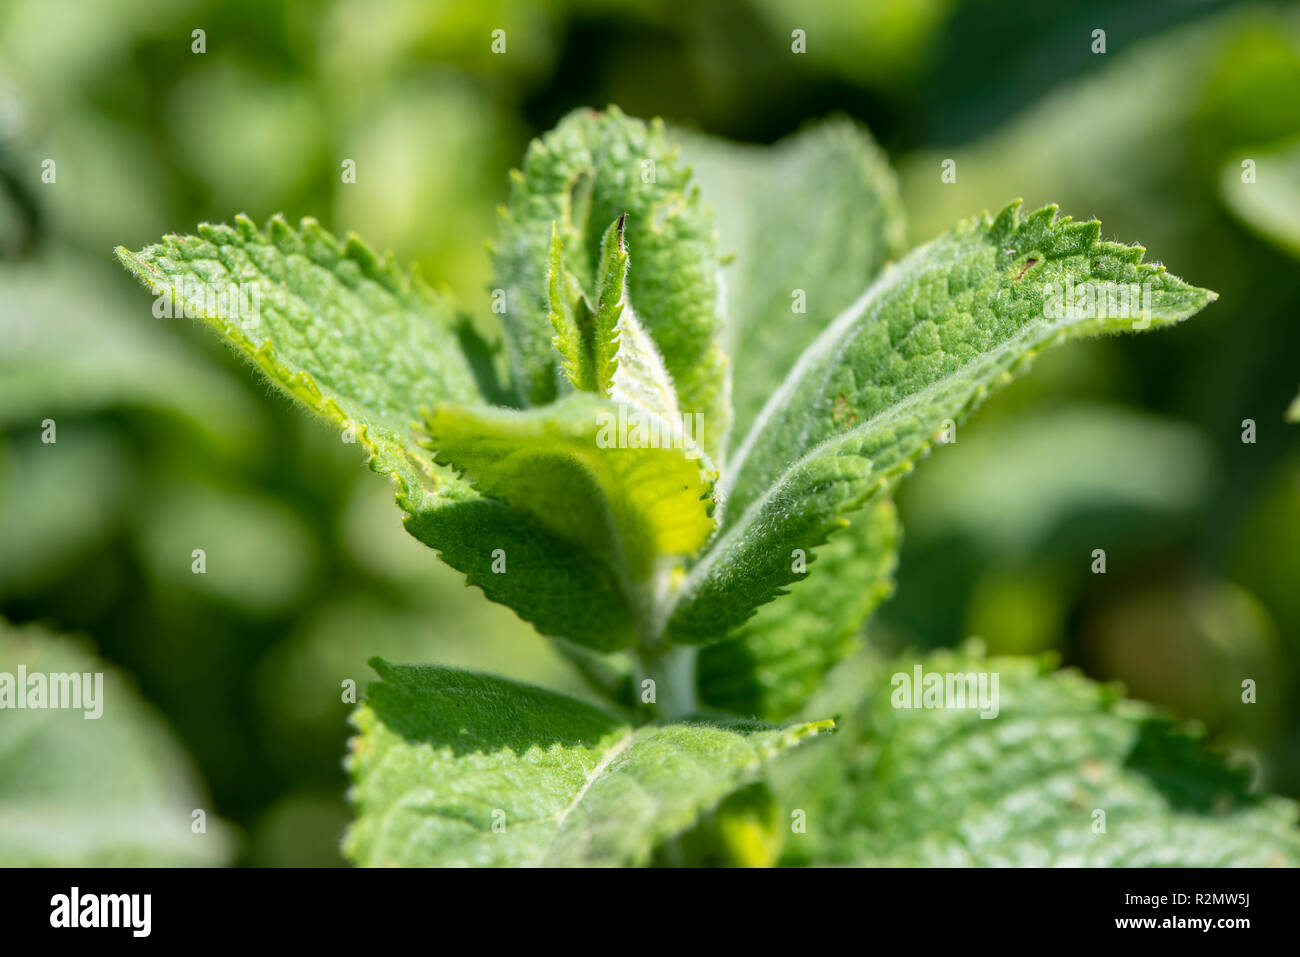 Peppermint as a medicinal plant for natural medicine and herbal medicine Stock Photo